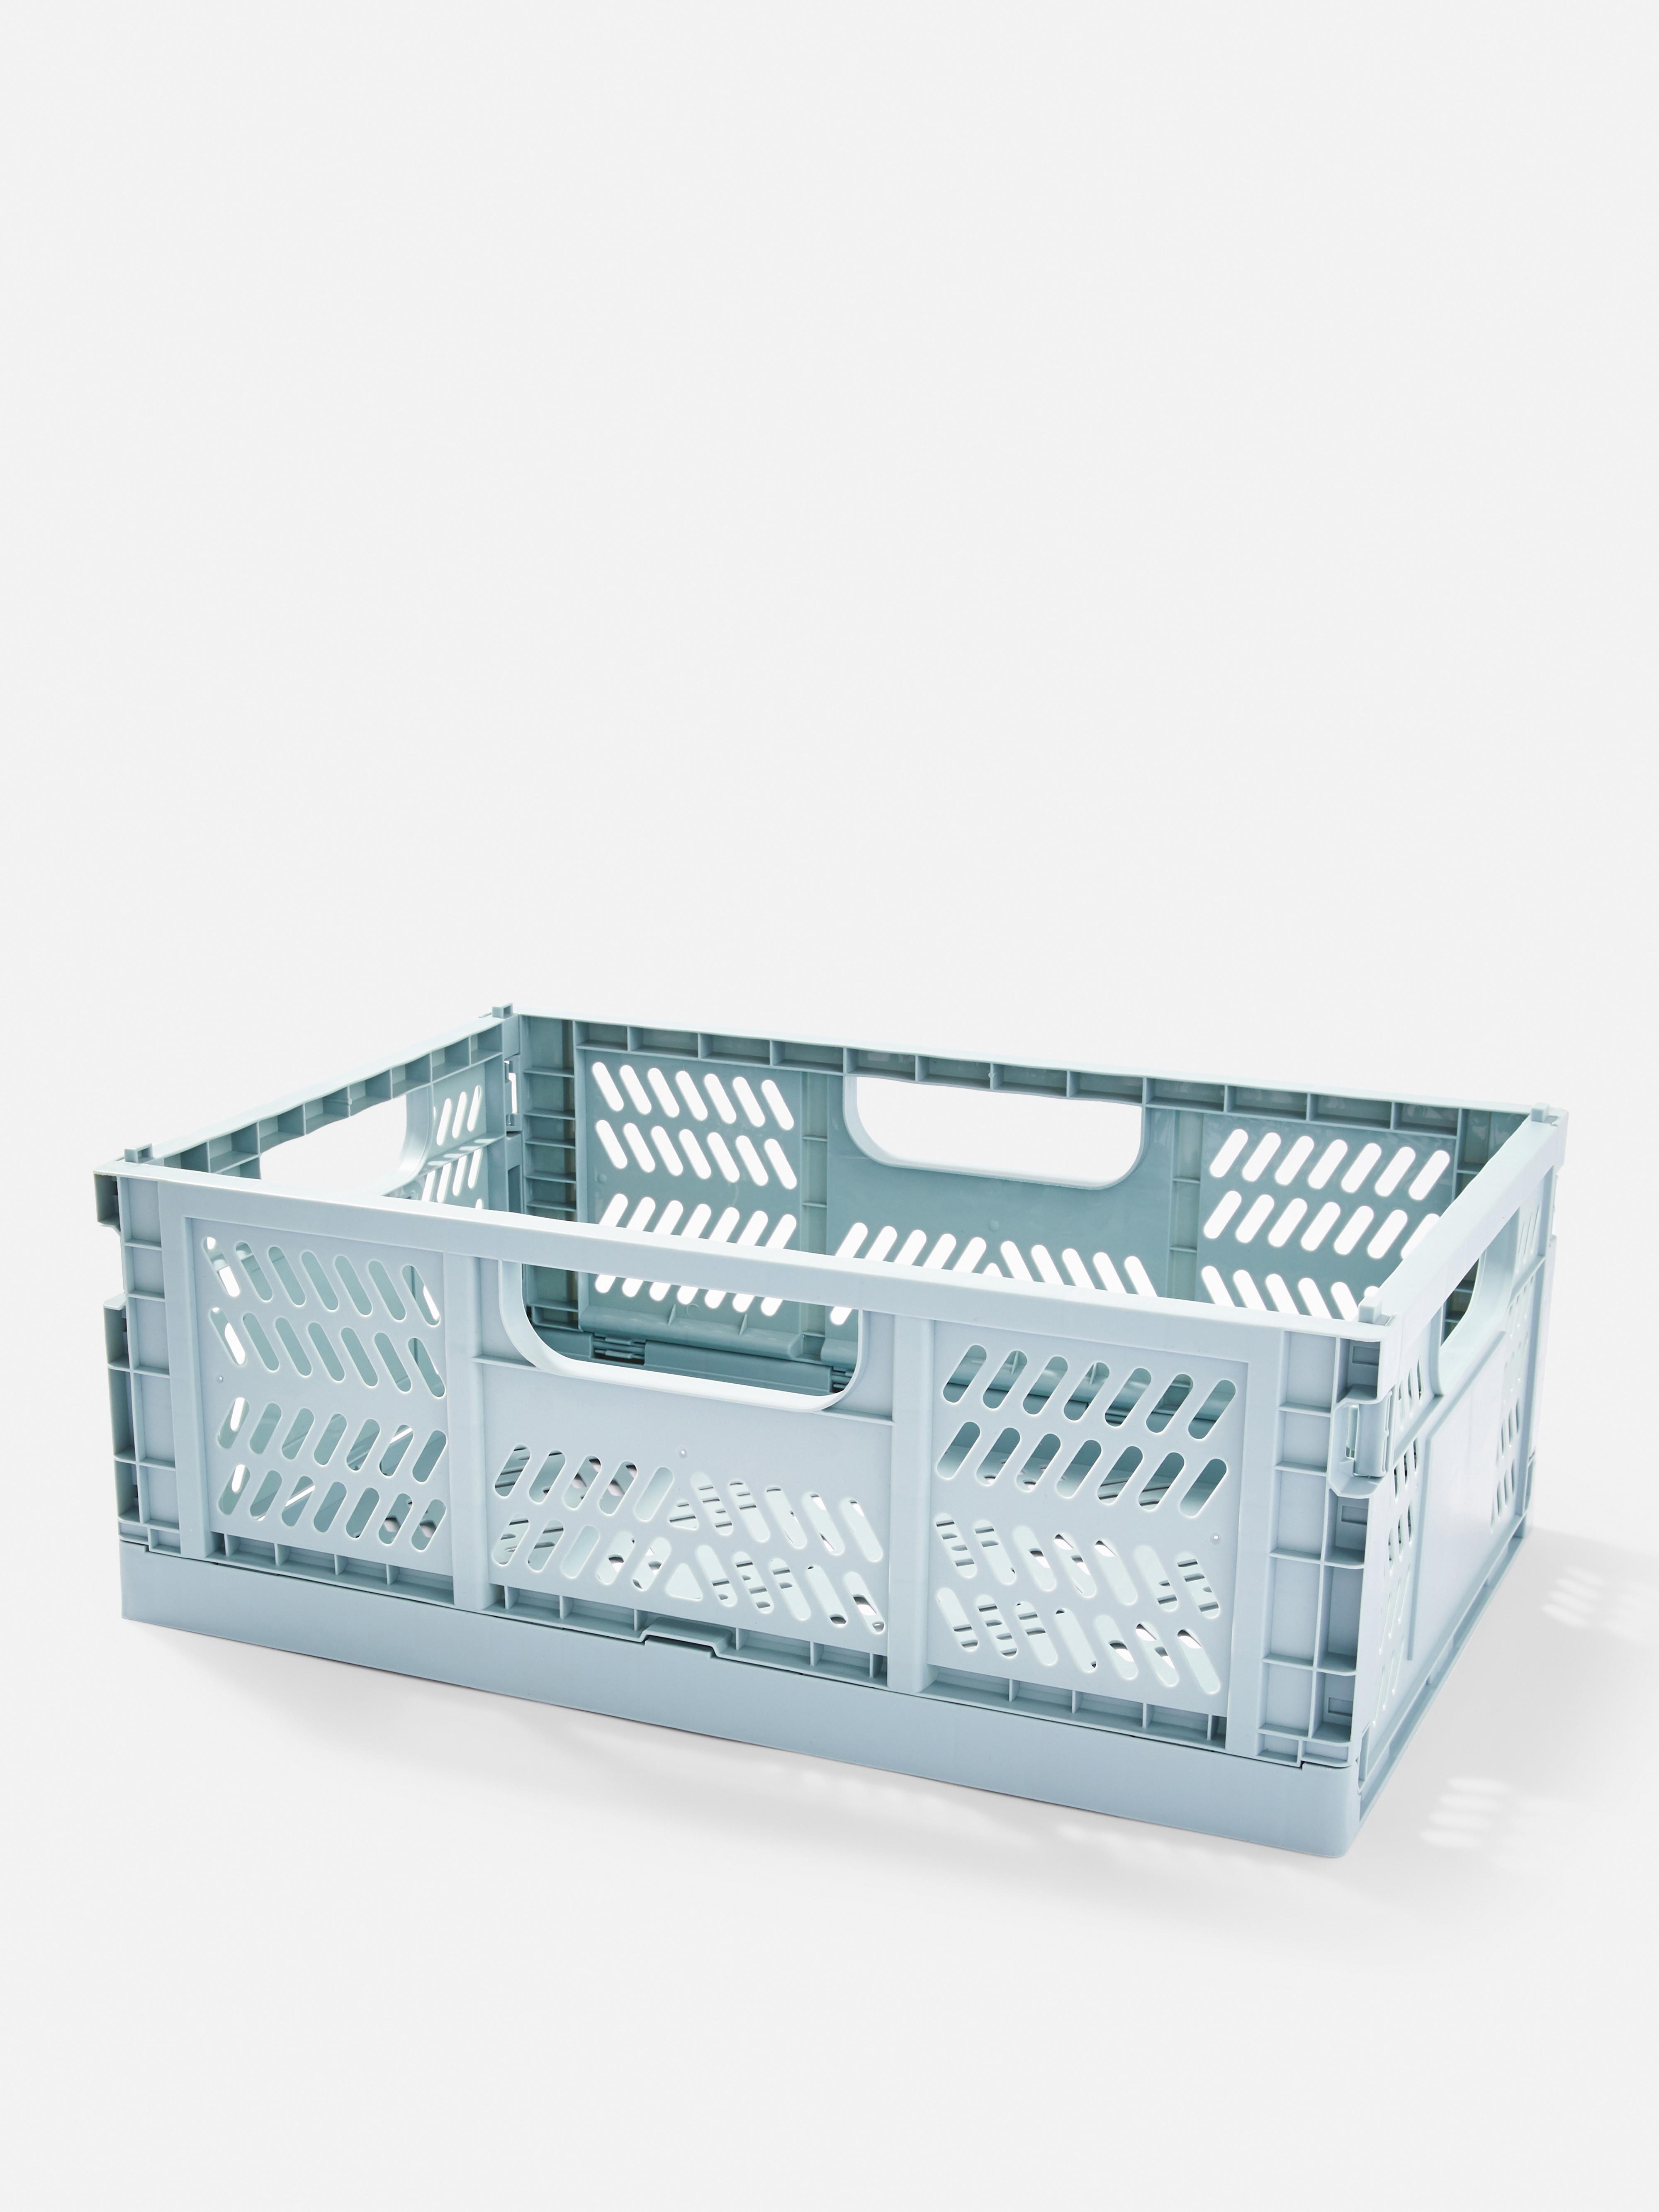 Large Collapsible Crate